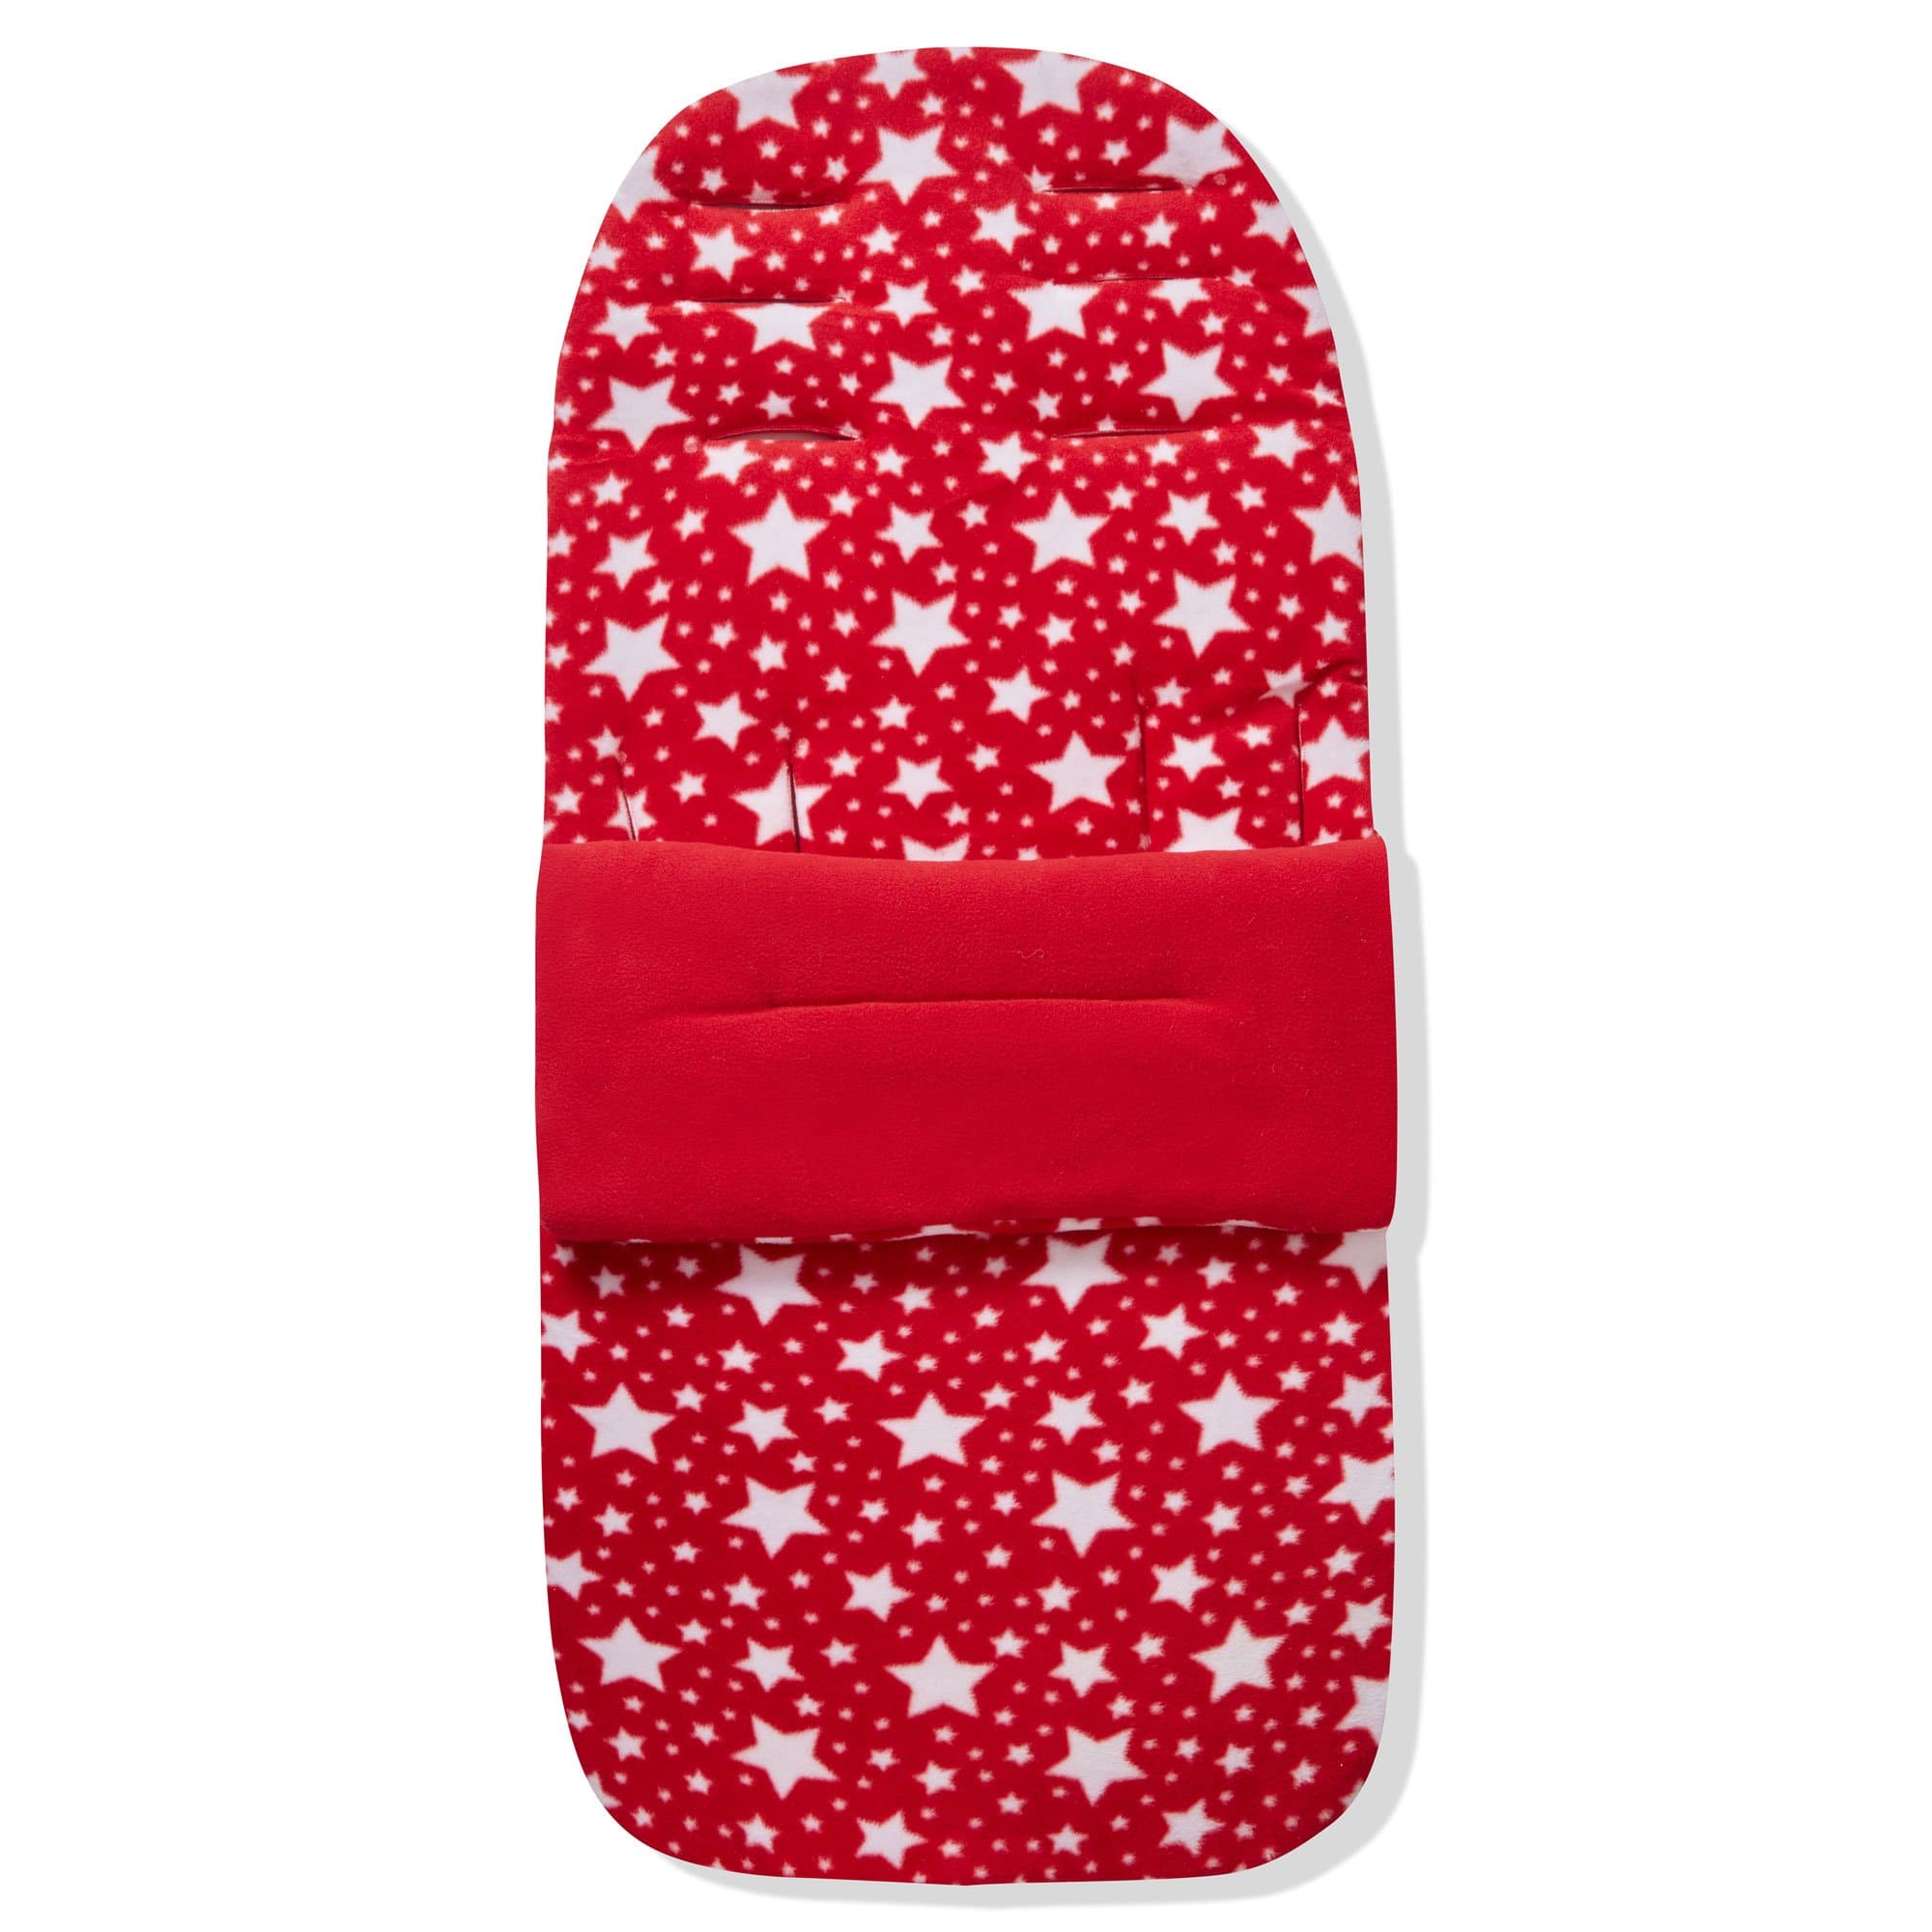 Fleece Footmuff / Cosy Toes Compatible with Bebe 9 - Red Star / Fits All Models | For Your Little One